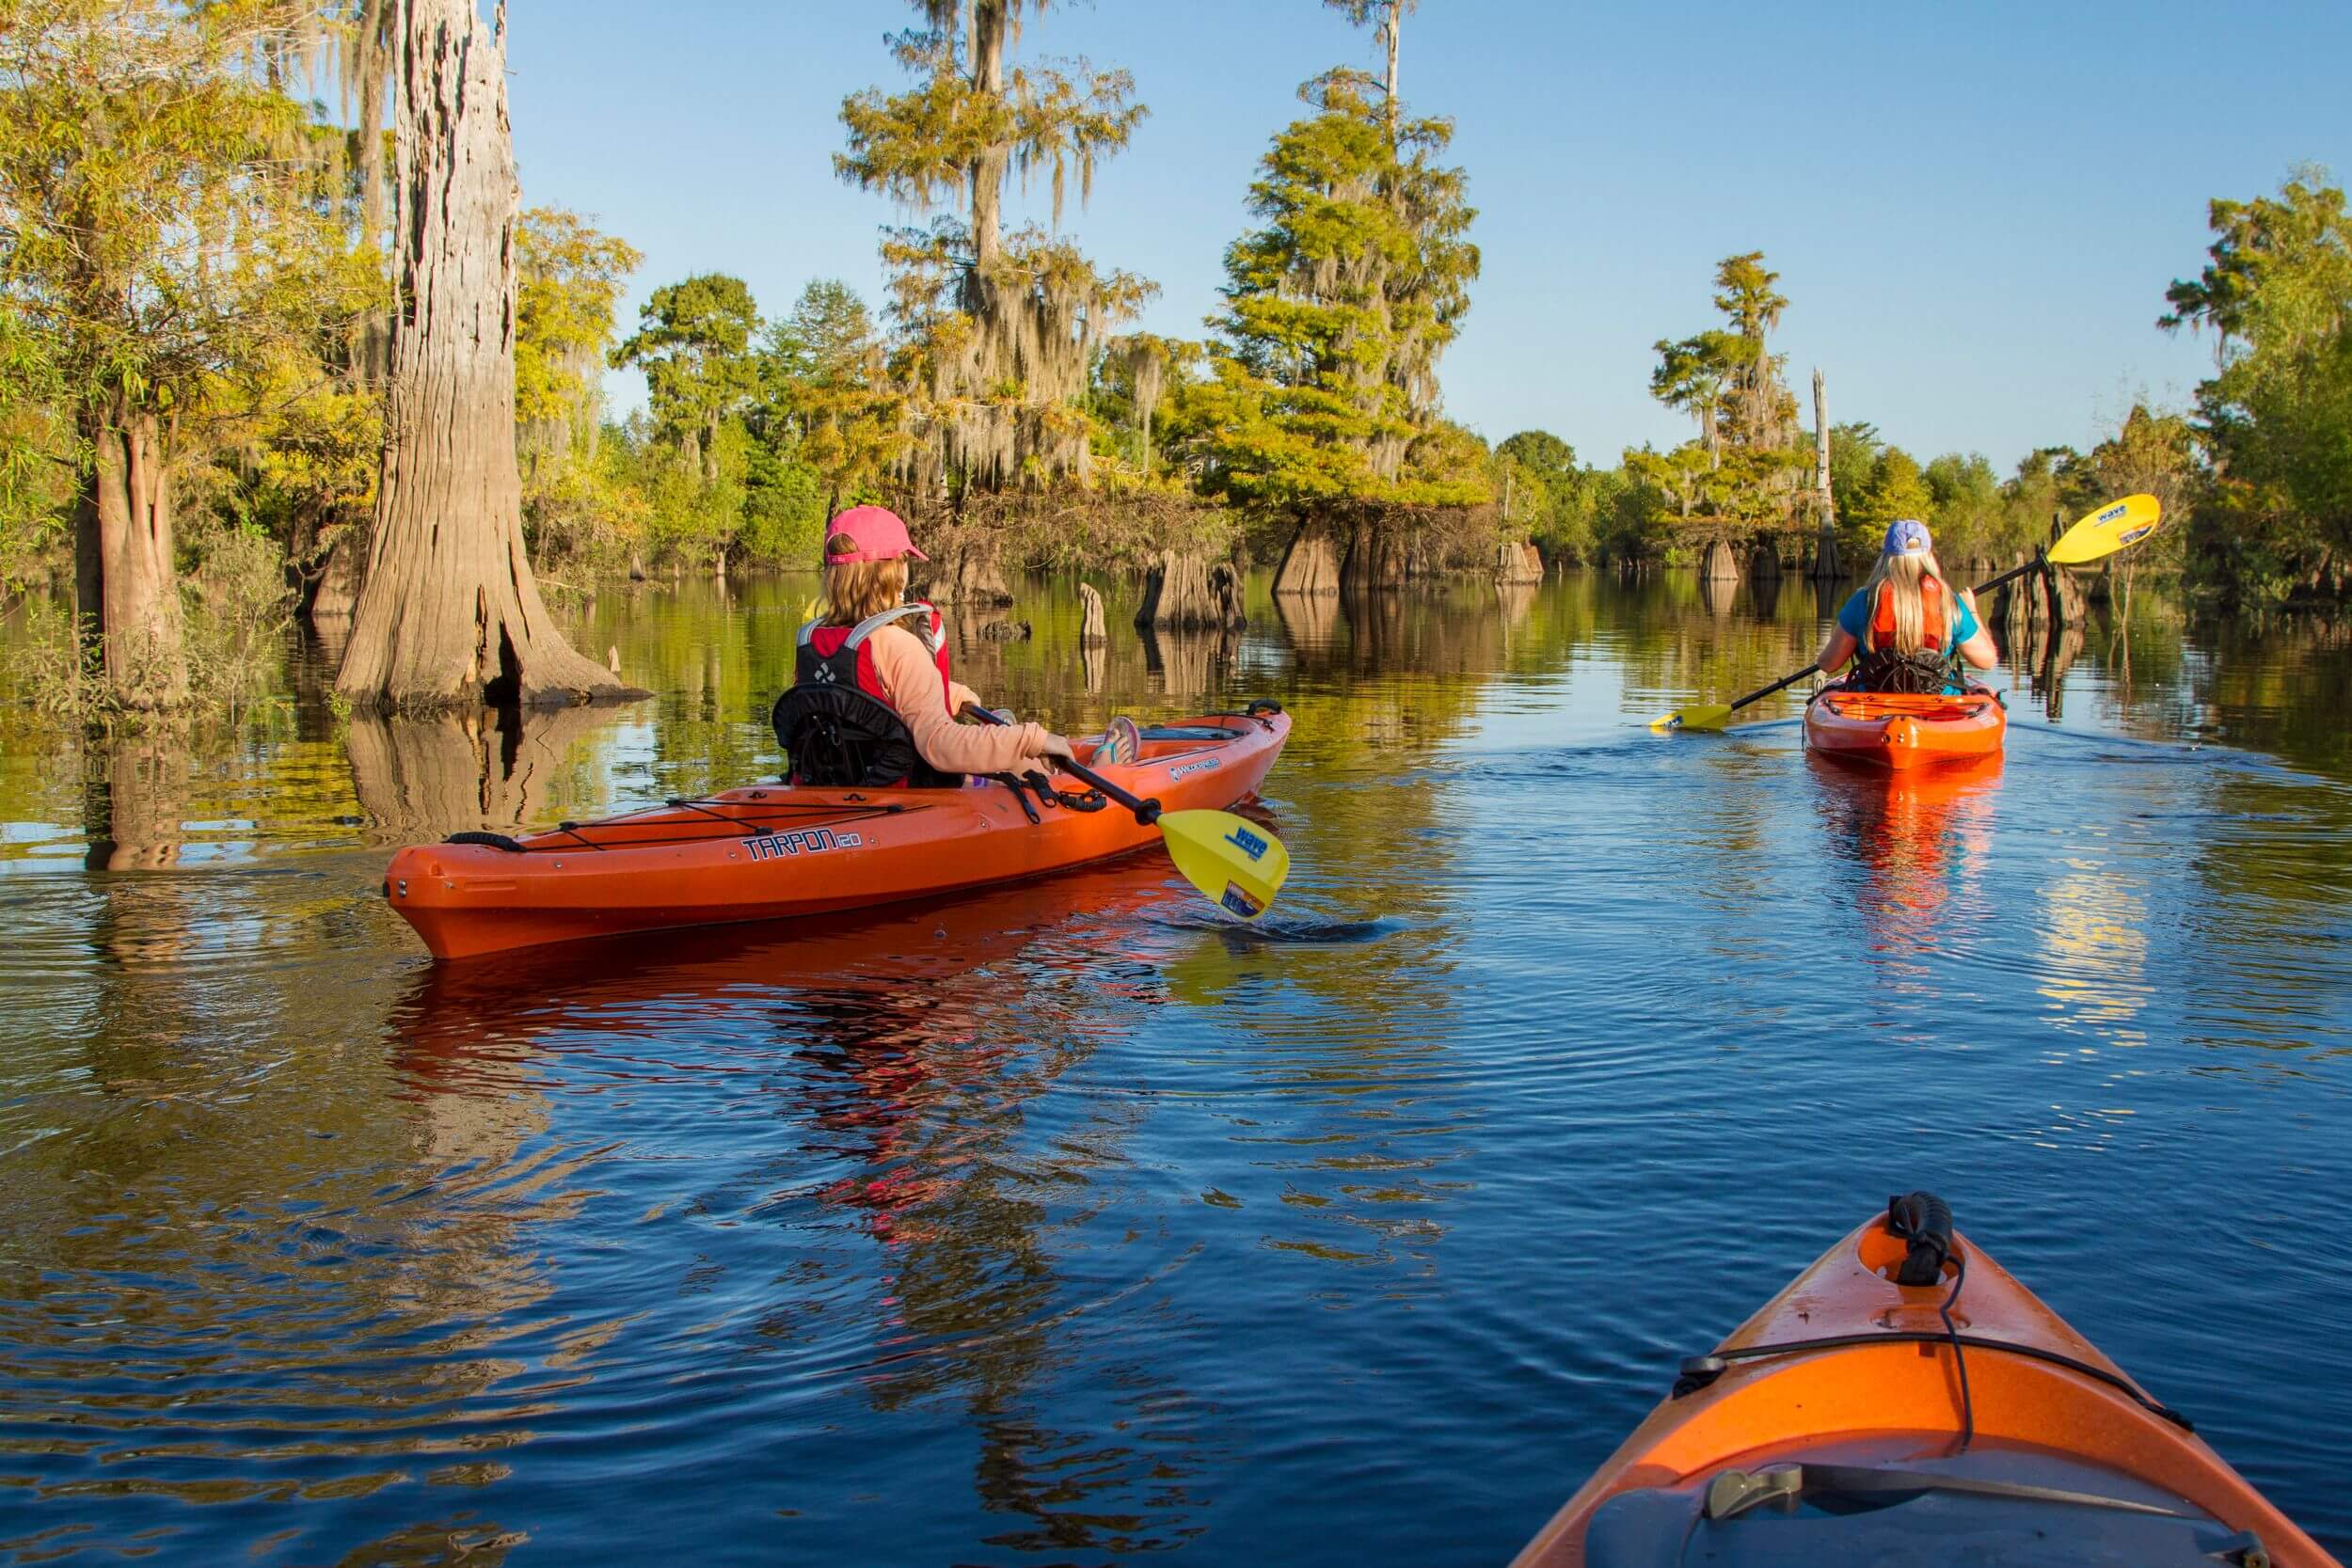 Two people paddle in kayaks down a river.